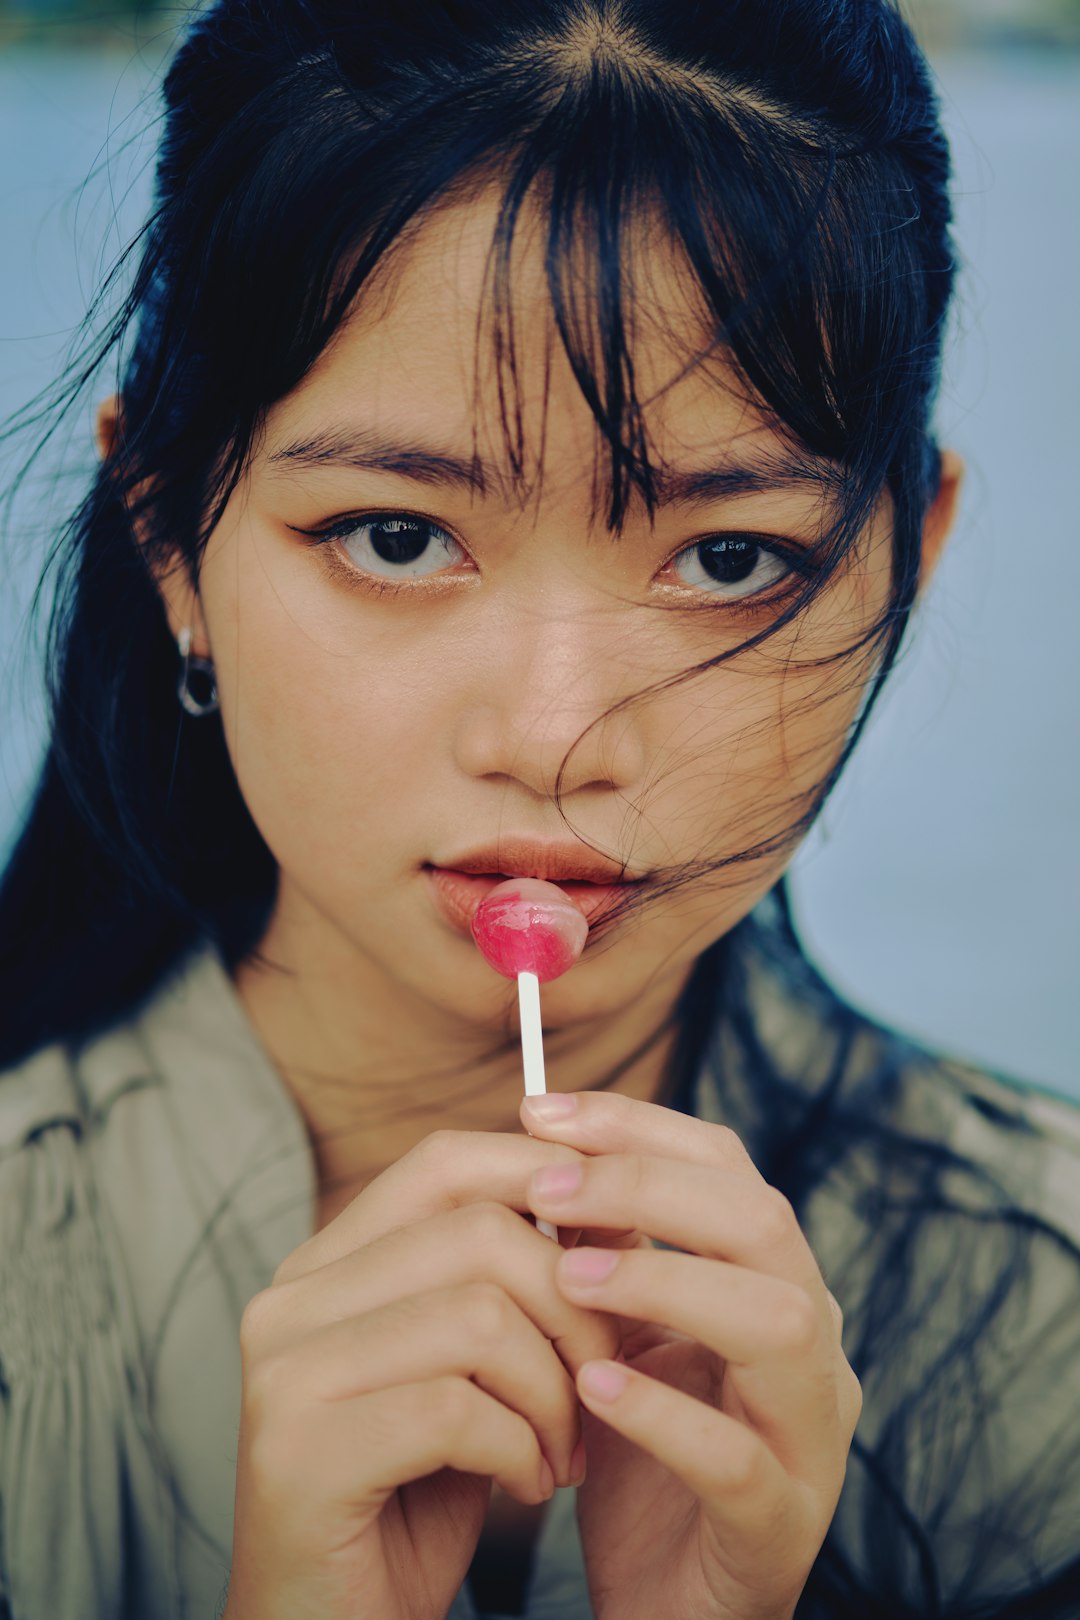 woman in gray shirt holding red lollipop